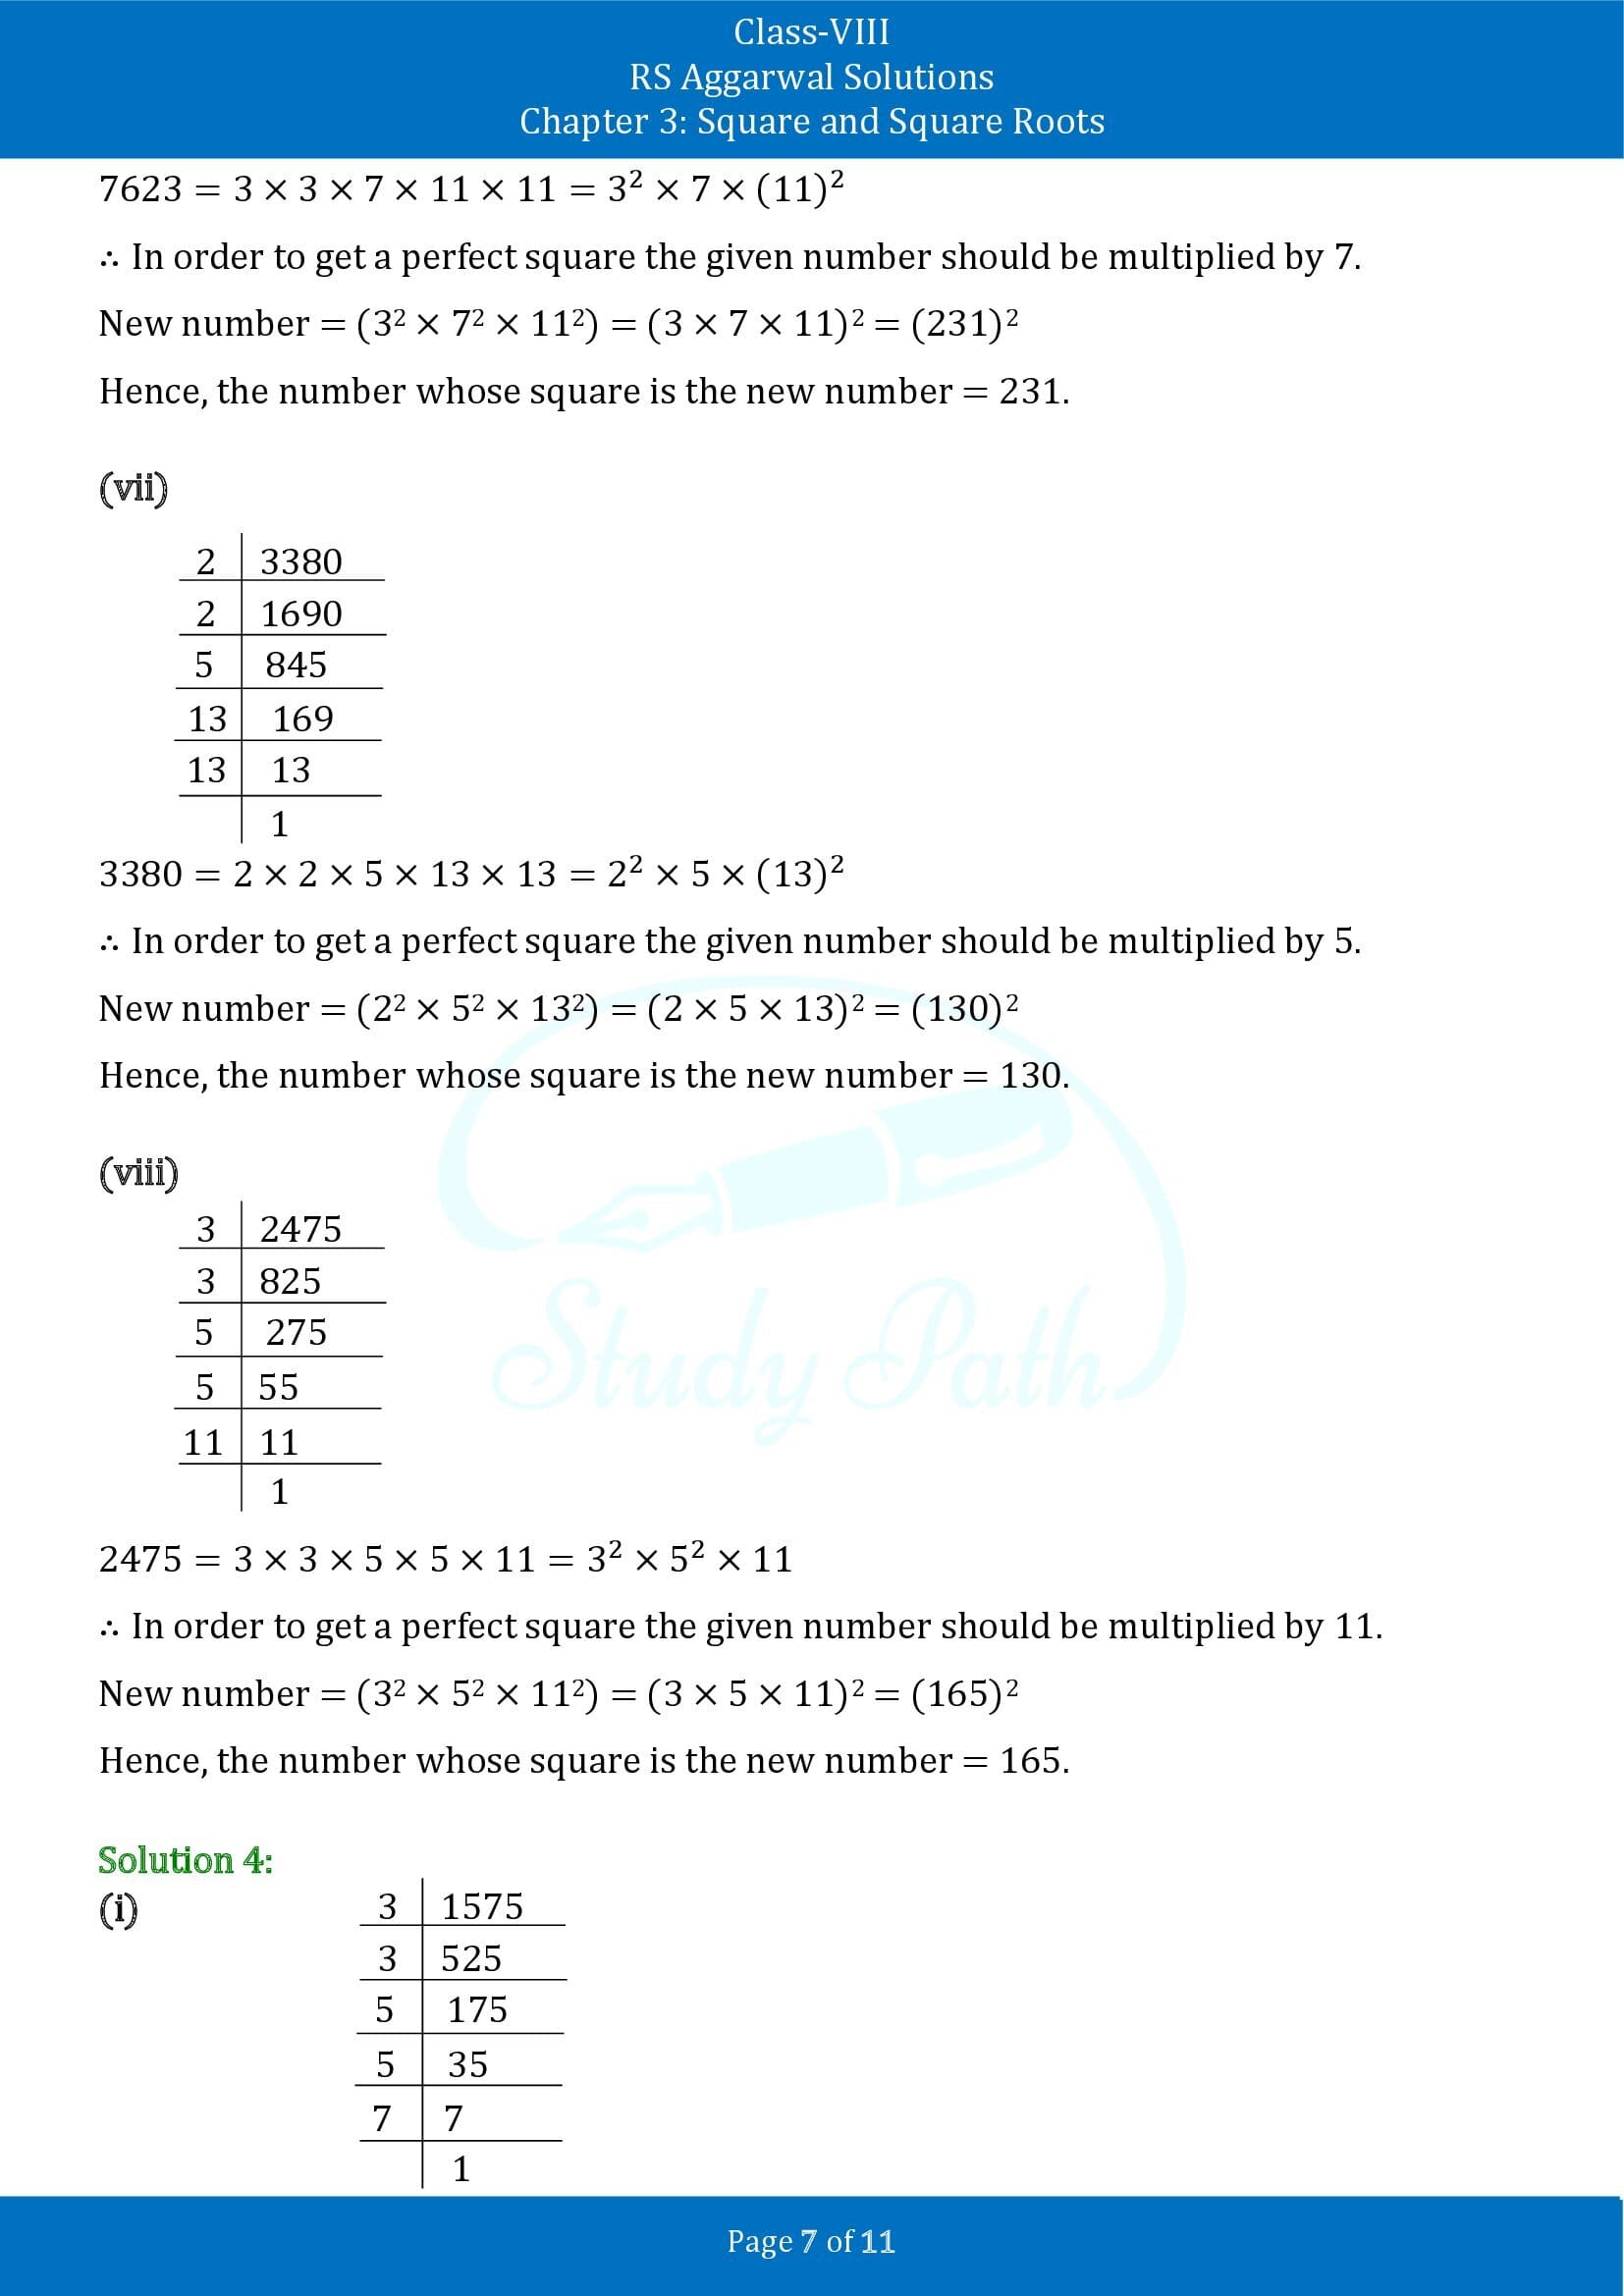 RS Aggarwal Solutions Class 8 Chapter 3 Square and Square Roots Exercise 3A 00007